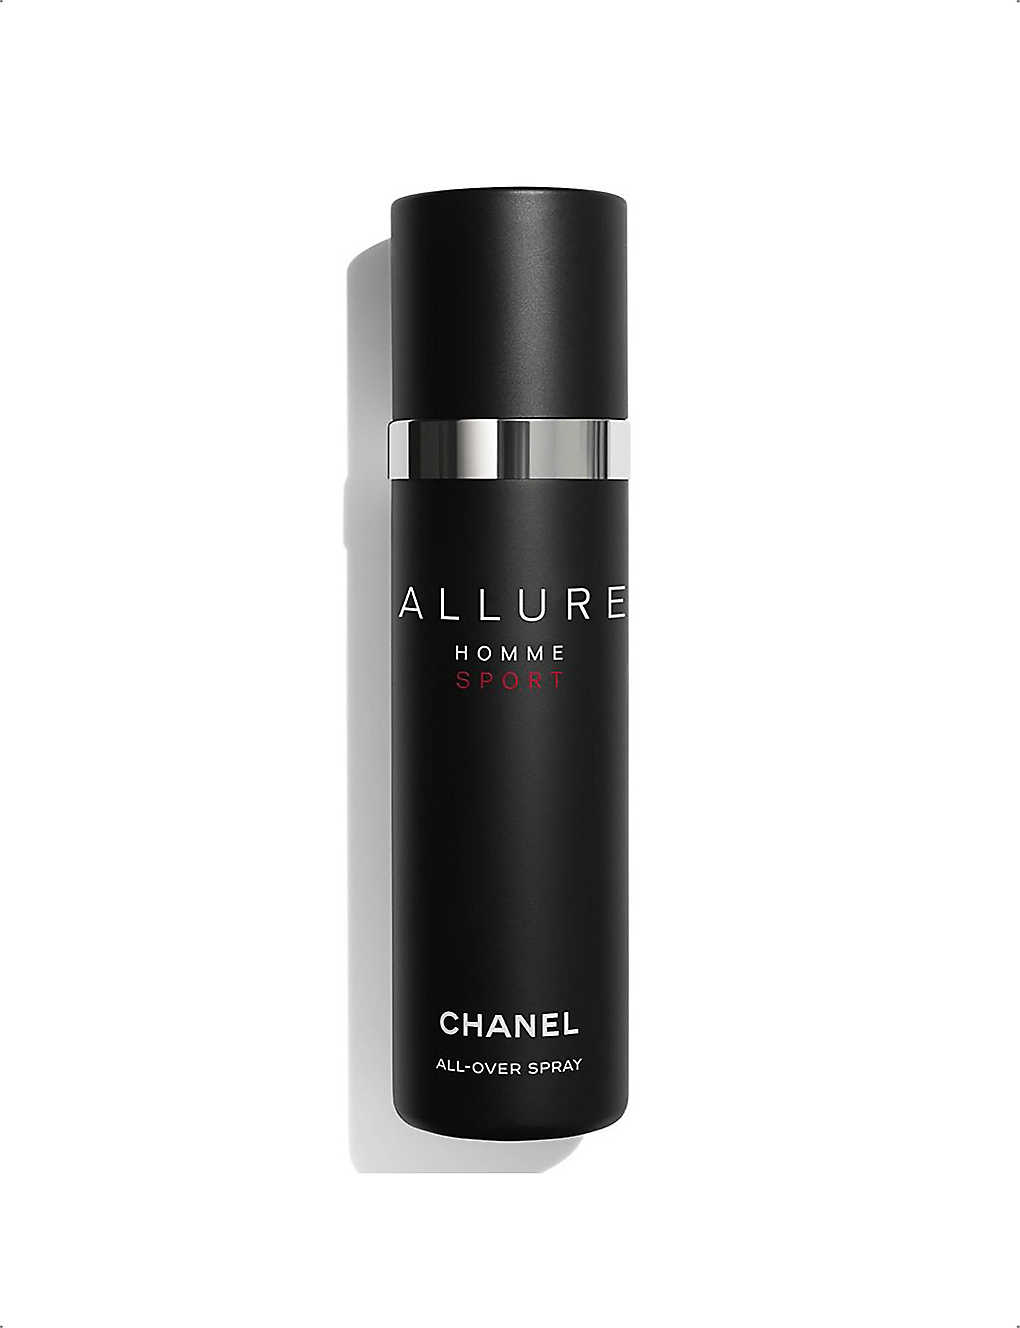 Chanel Allure Homme Sport All-over Spray